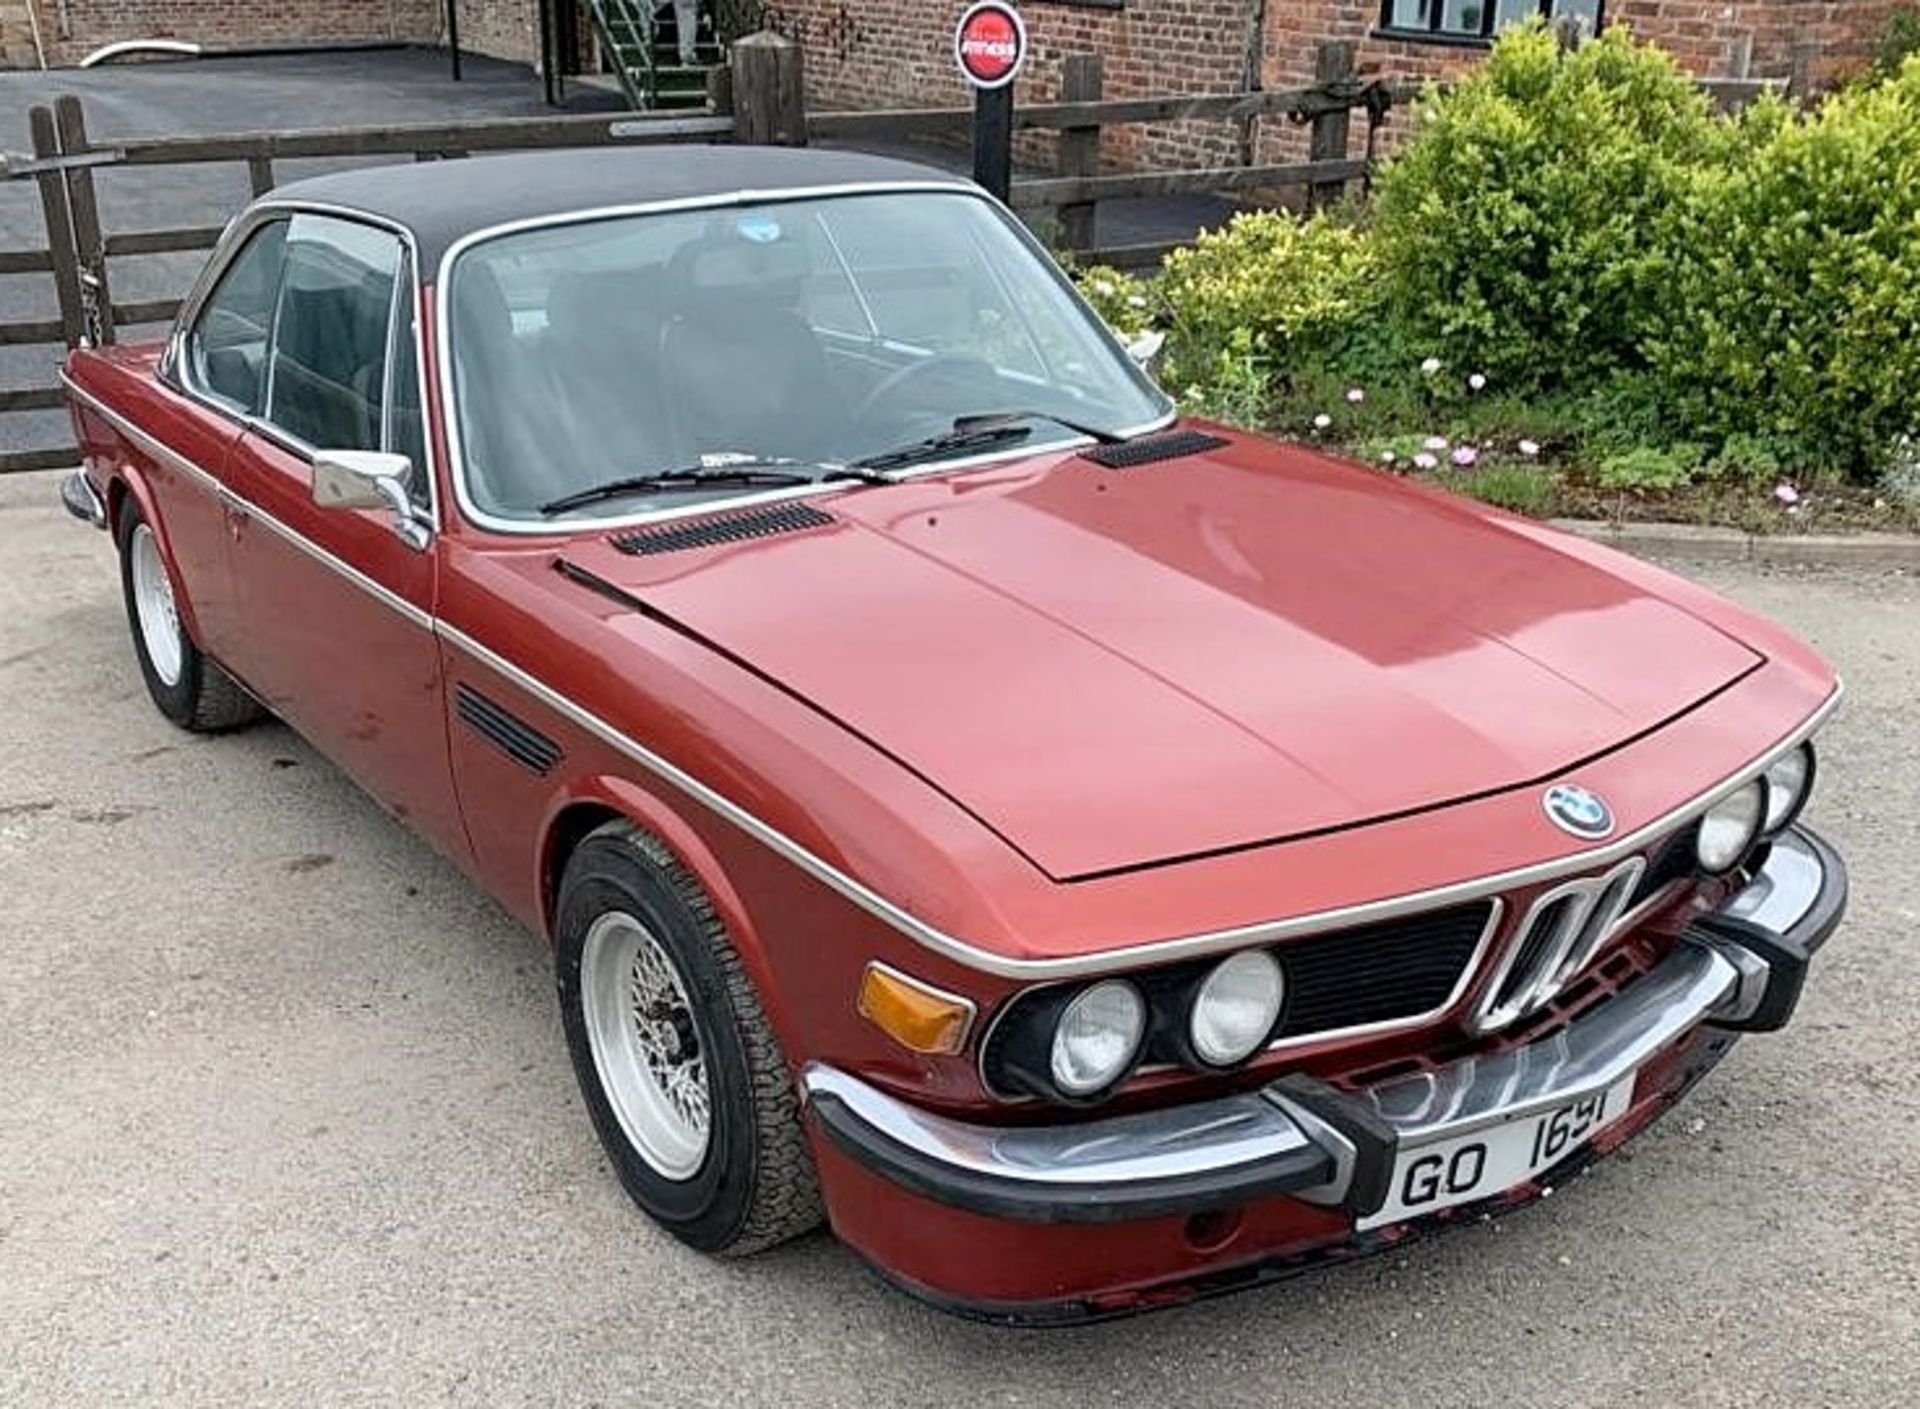 1 x BMW E9 2500 CSA Classic Car - Ultra Rare Example - CL022 - Location: Wilmslow, Cheshire